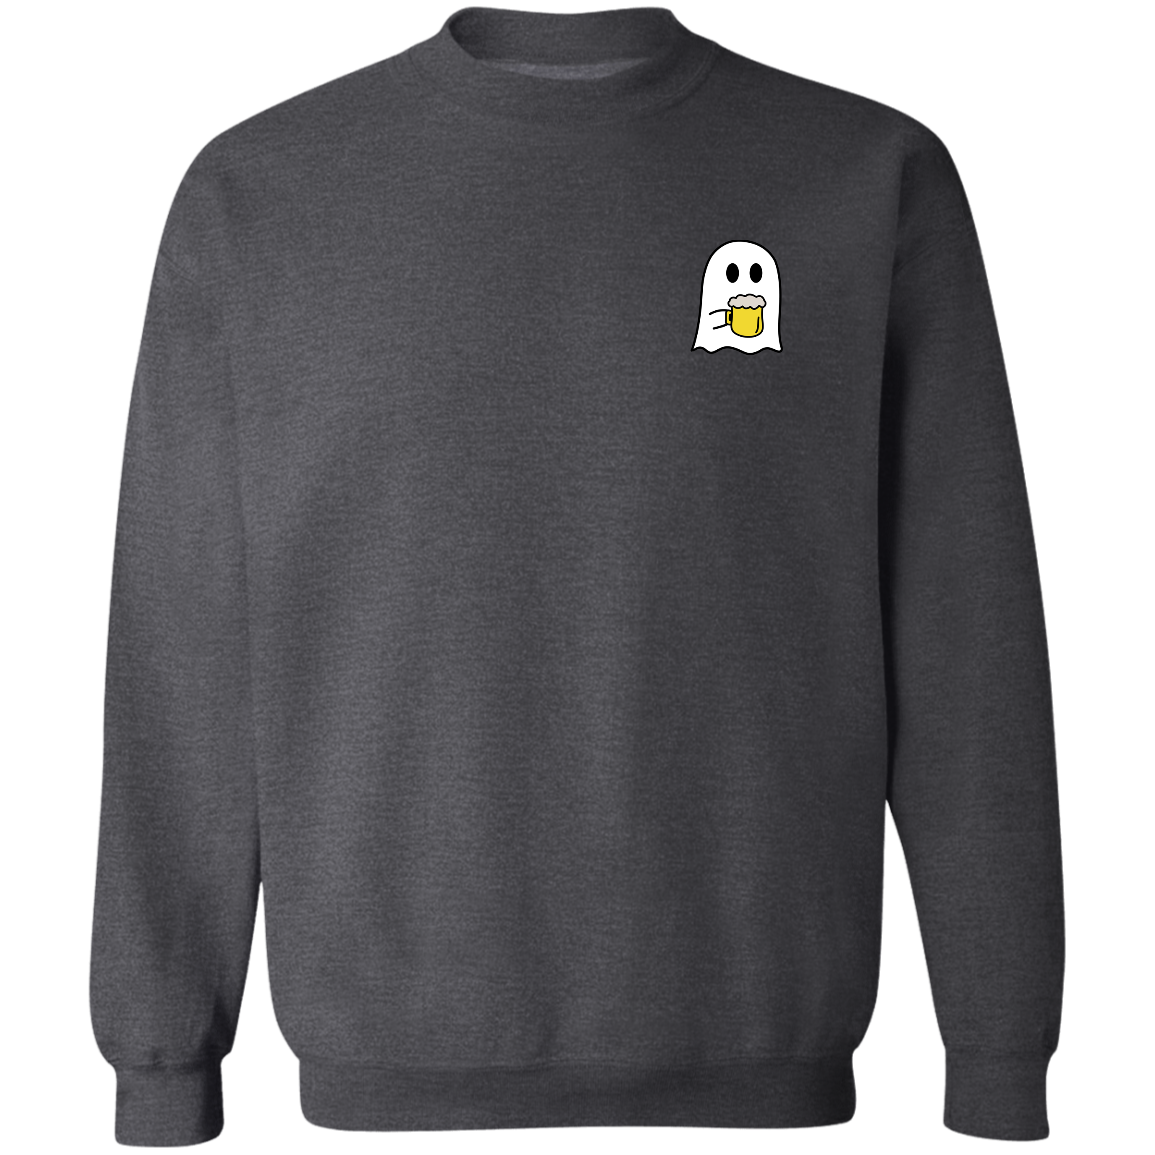 Get trendy with Coffee-drinking ghost  Crewneck Pullover Sweatshirt - Sweatshirts available at Good Gift Company. Grab yours for $30 today!